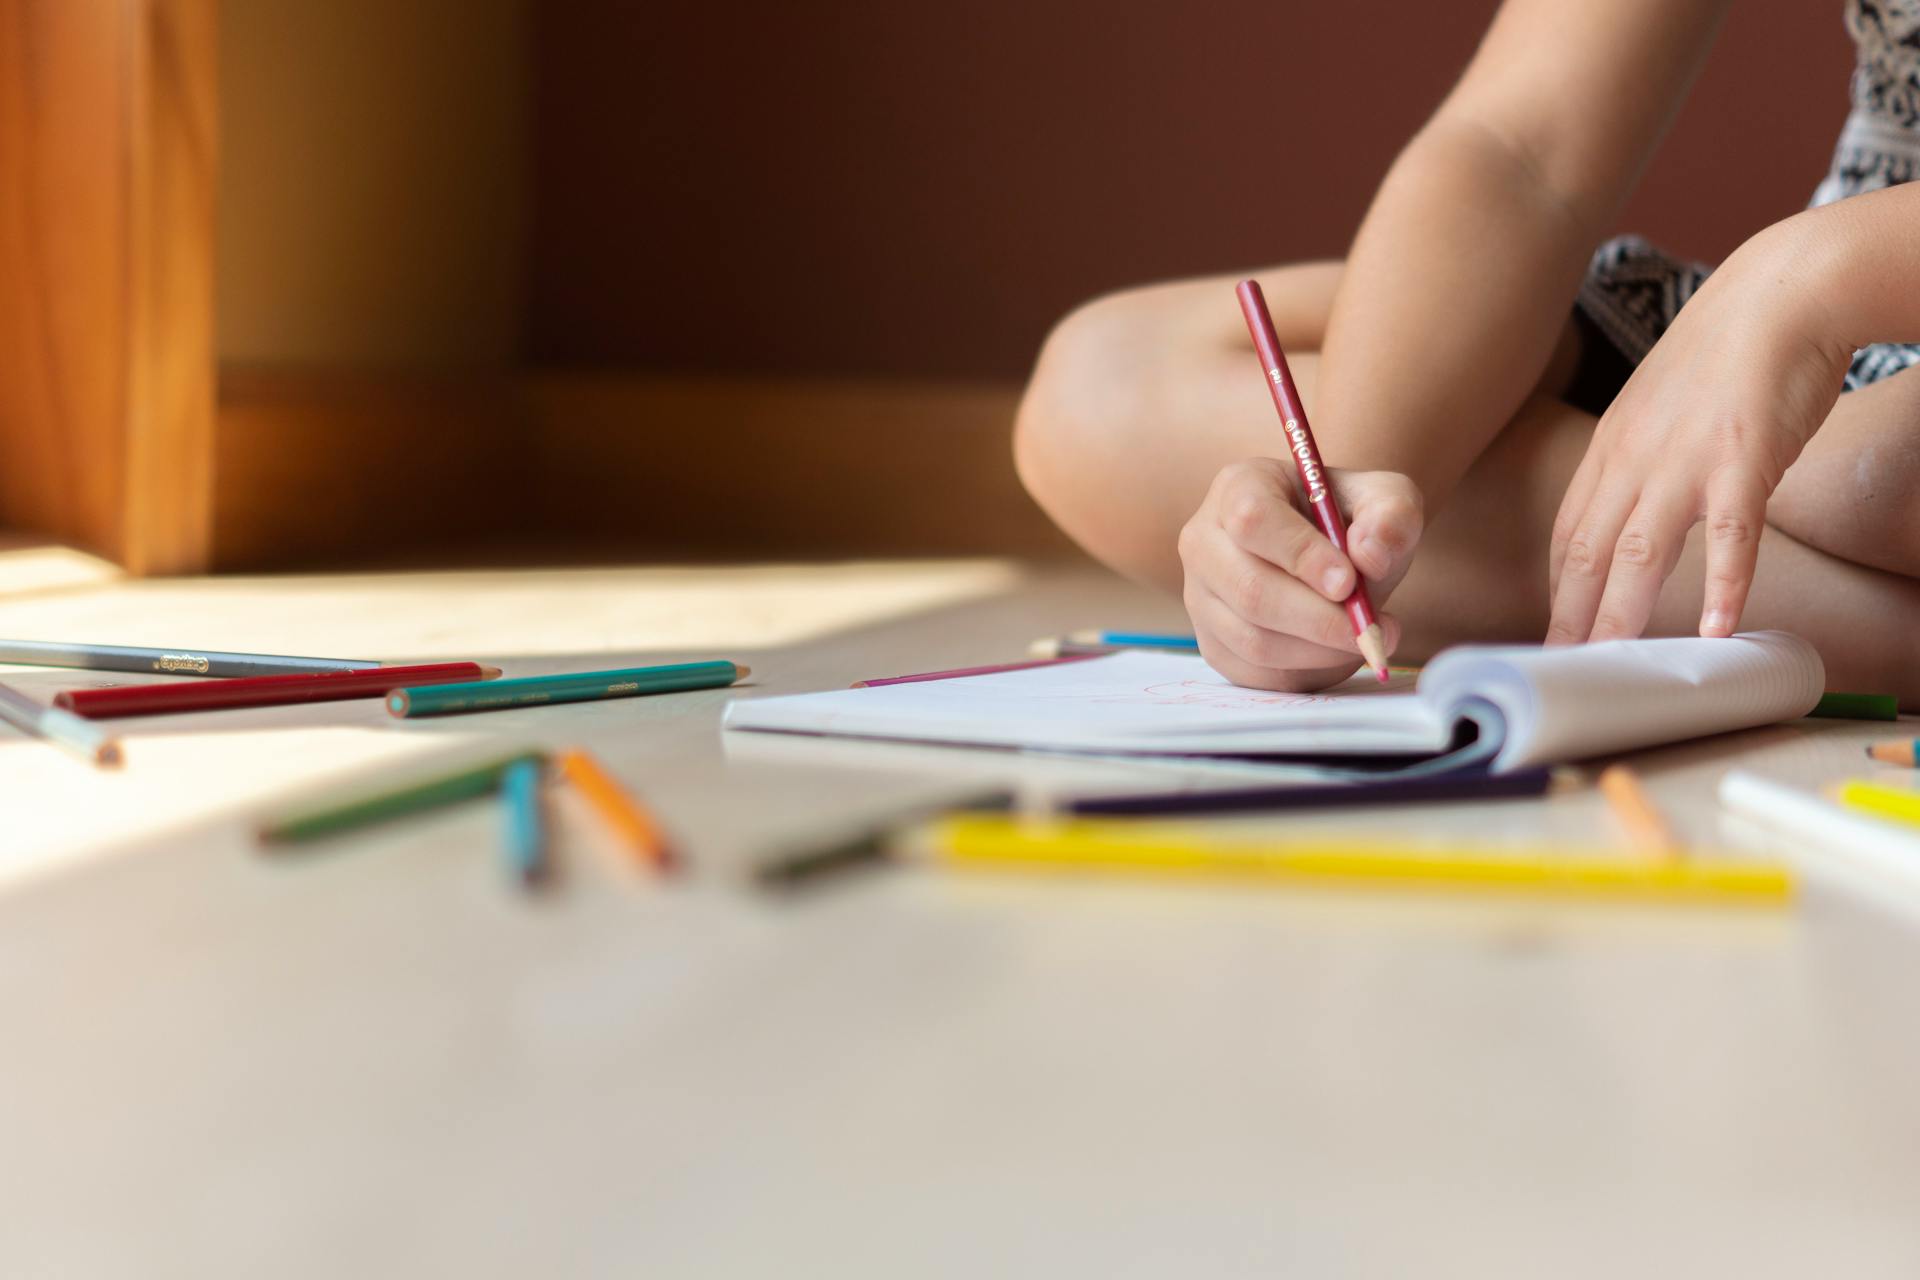 A child sitting on the floor and drawing | Source: Pexels